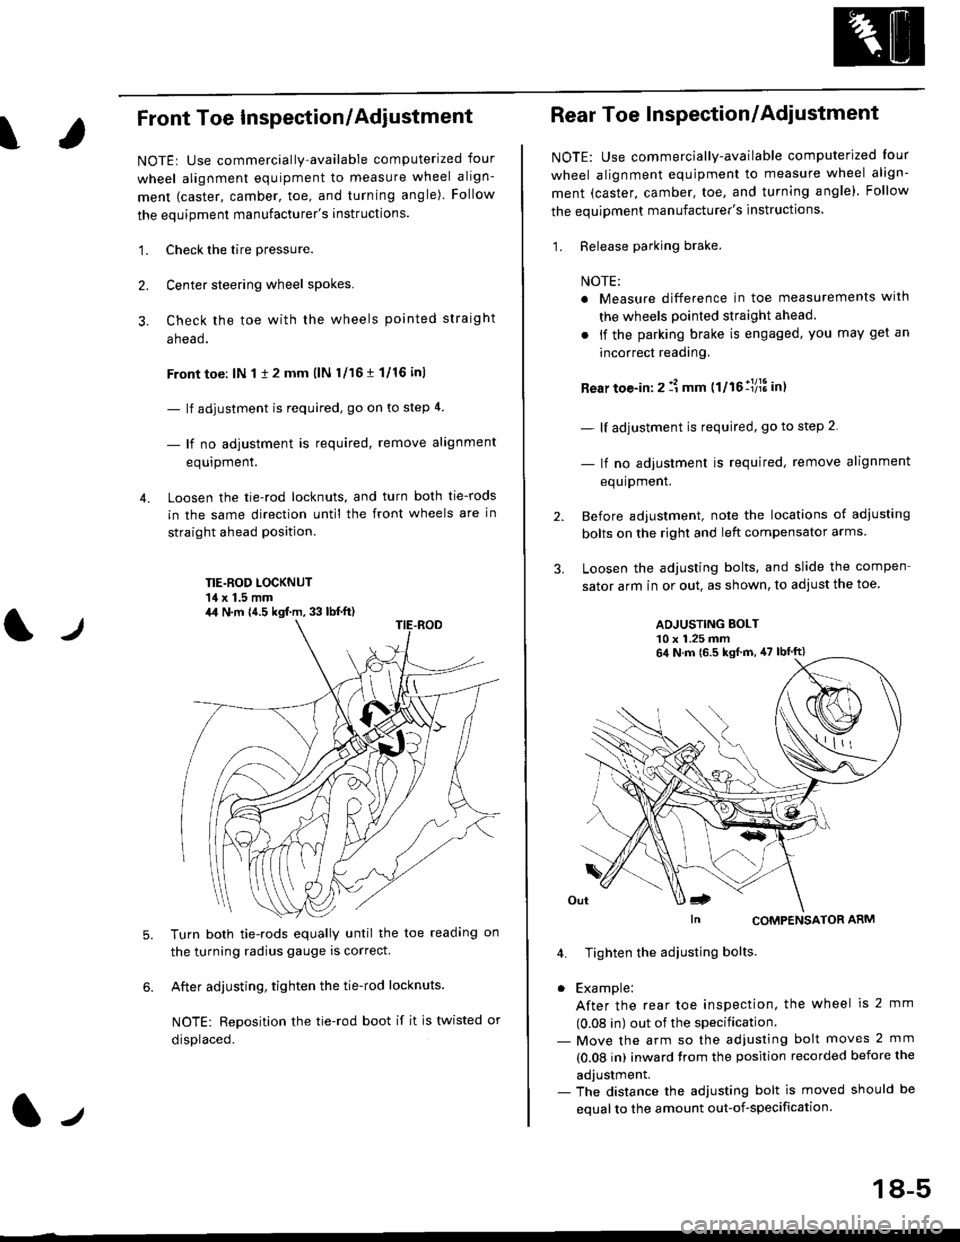 HONDA CIVIC 1996 6.G Owners Manual ?
Front Toe Inspection/Adiustment
NOTE: Use commercially-available computerized four
wheel alignment equipment to measure wheel align-
ment (caster, camber, toe, and turning angle). Follow
the equipme